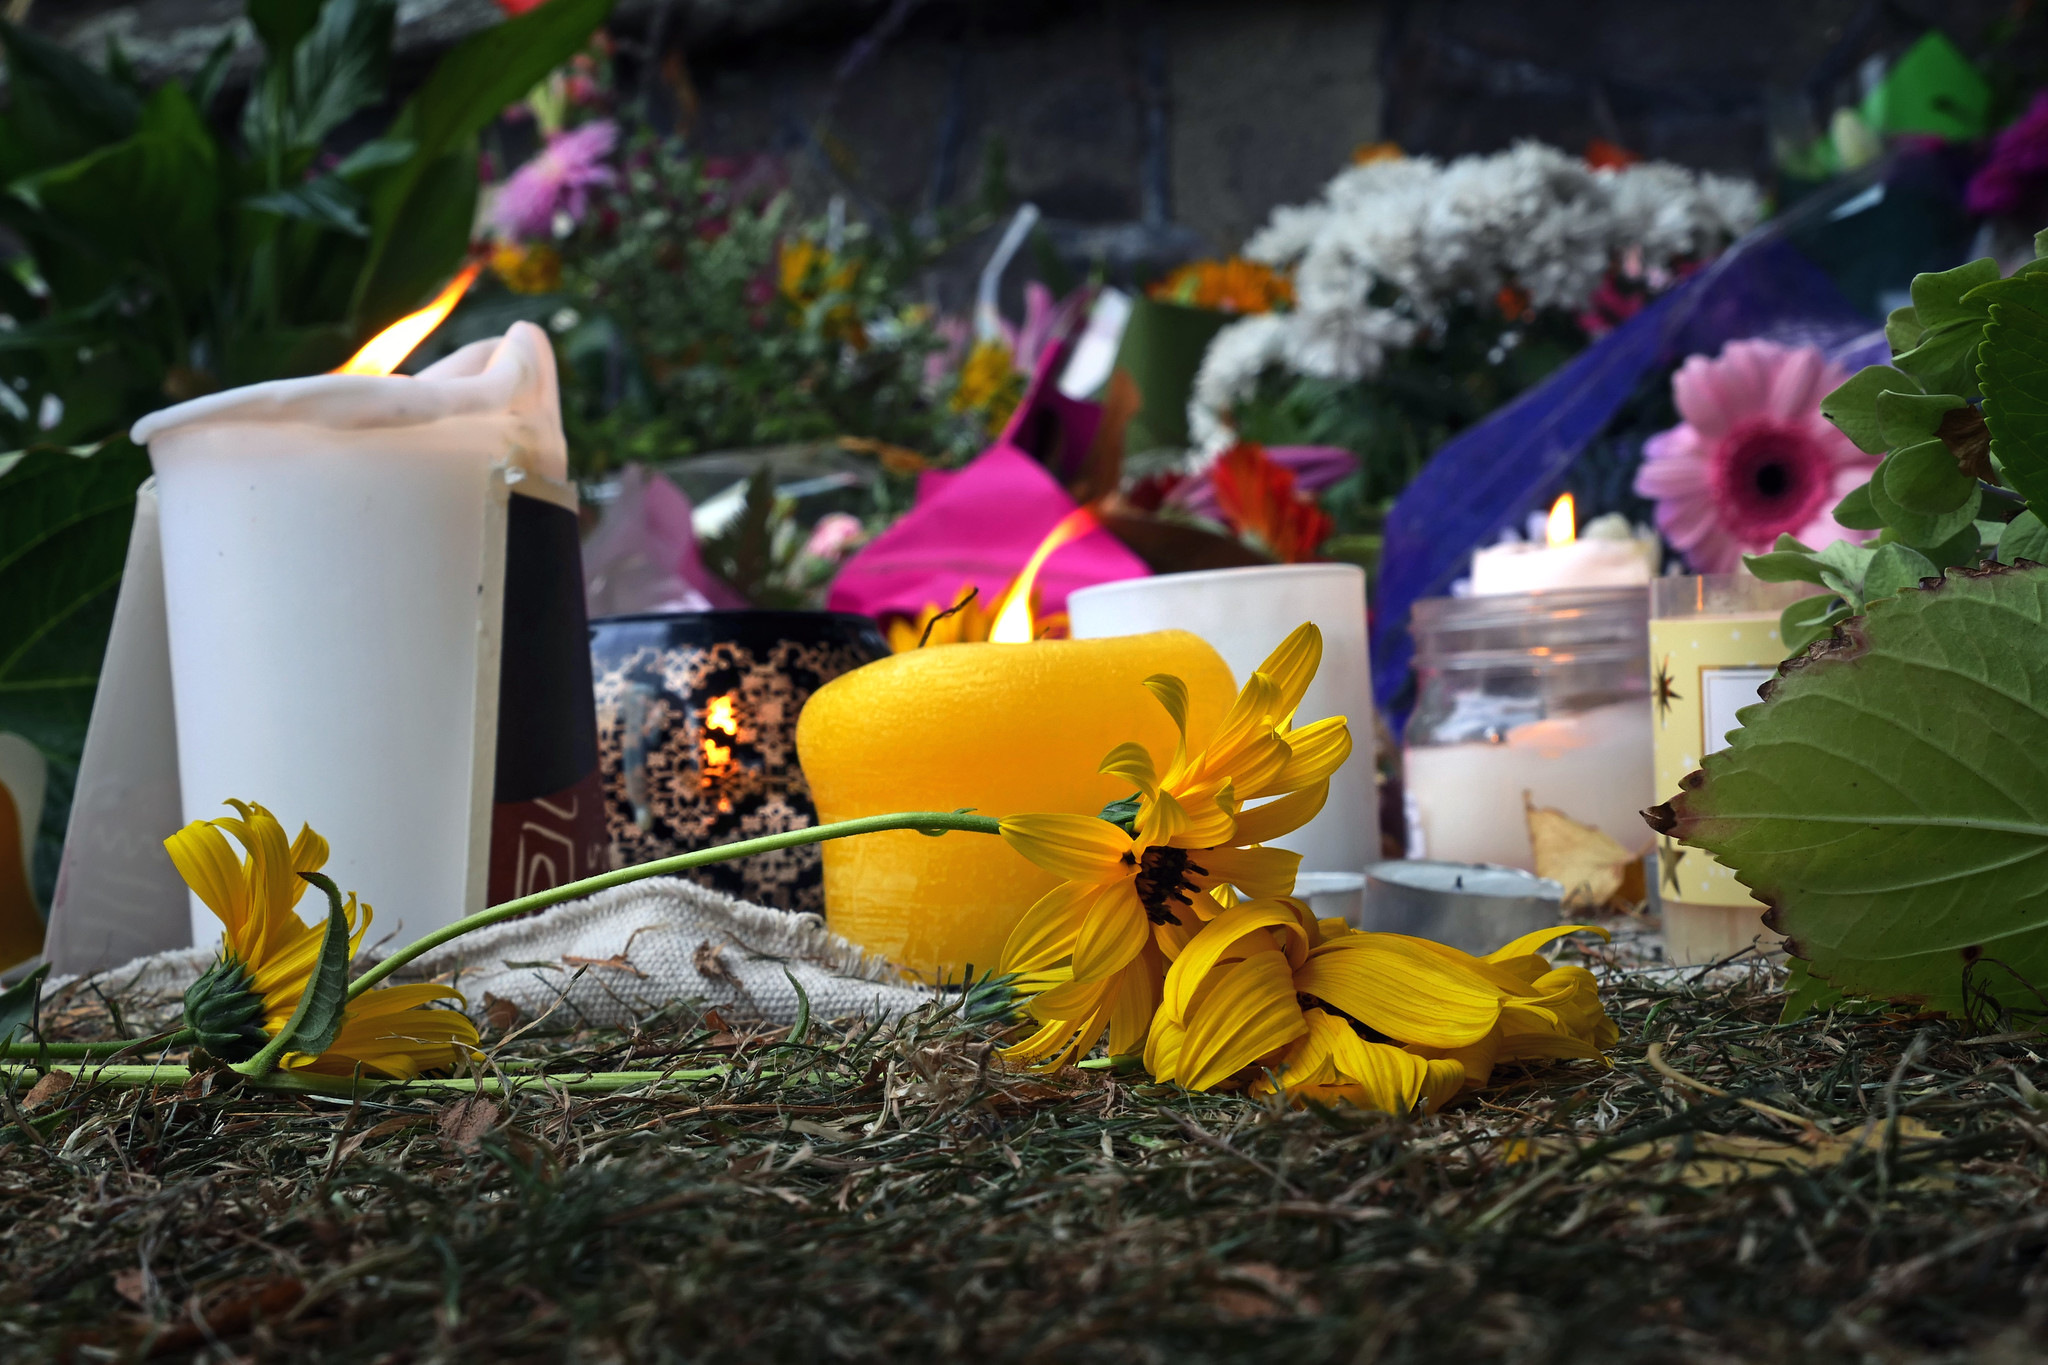 Photograph of candles and flowers arranged to mourn victims of the shootings